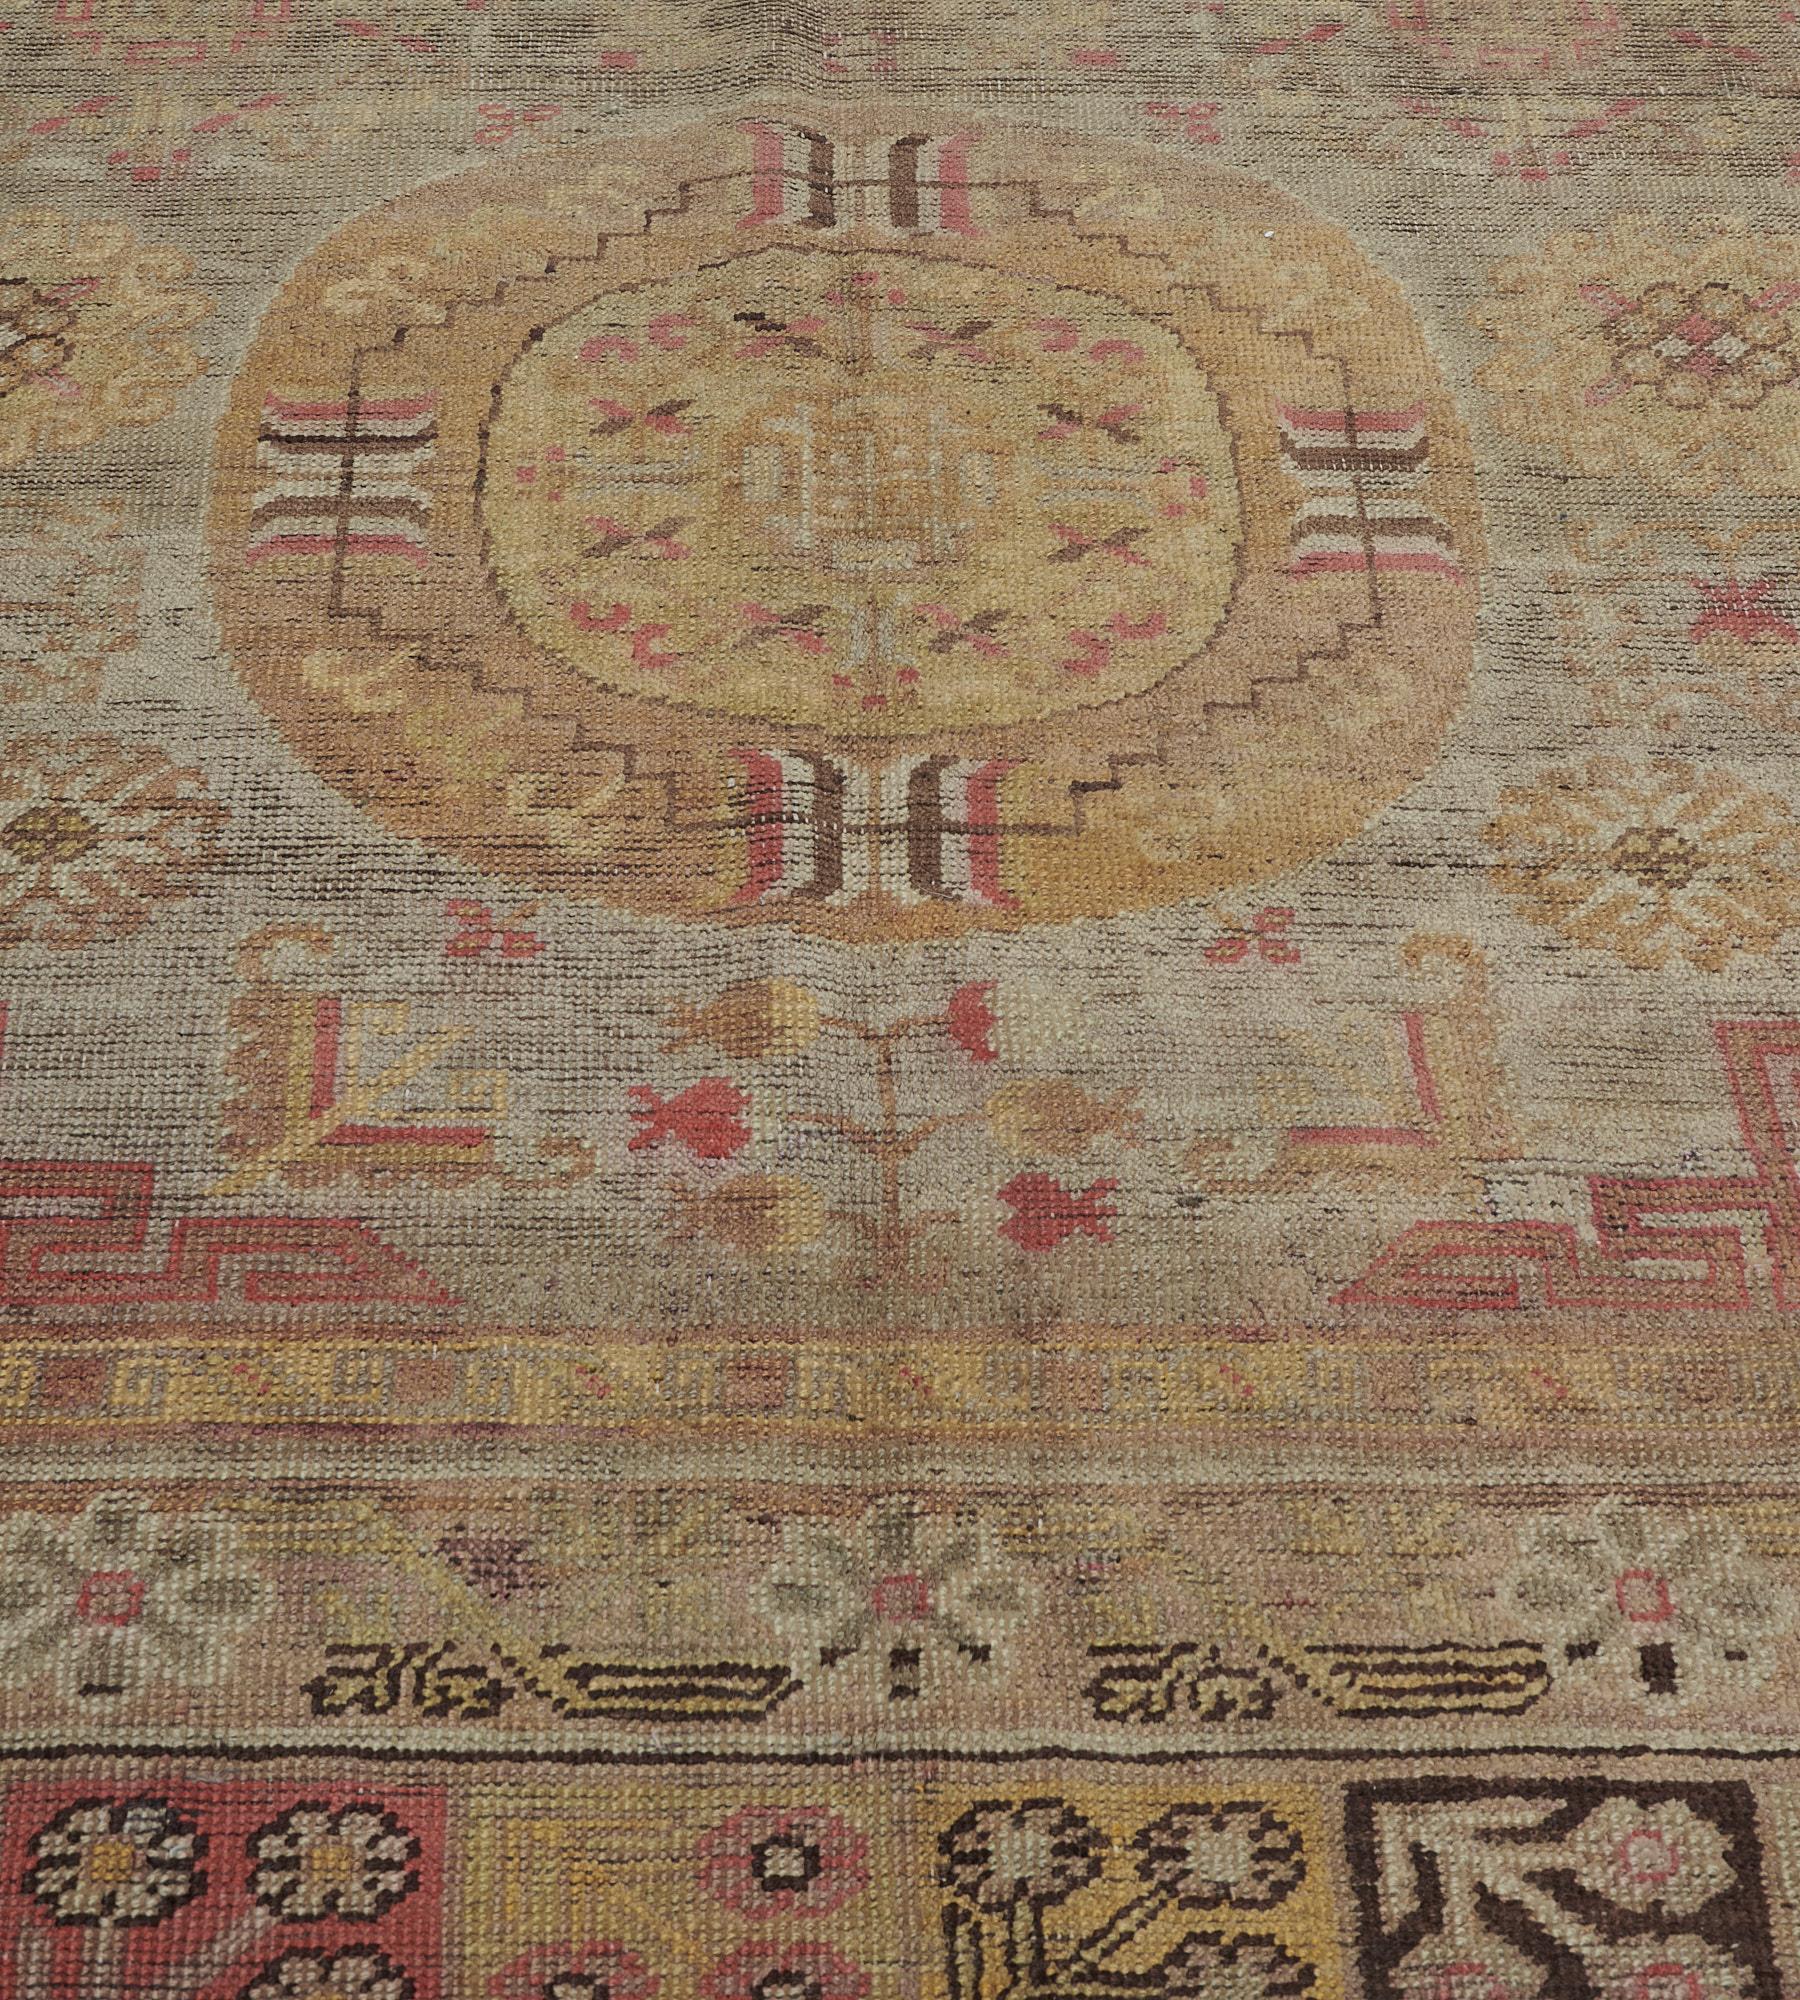 This antique, circa 1870, Khotan rug has a steel-blue field scattered with a variety of flowerheads and further floral motifs around a column of three mustard-yellow and pale brown roundels, the central roundel containing a hooked lozenge with